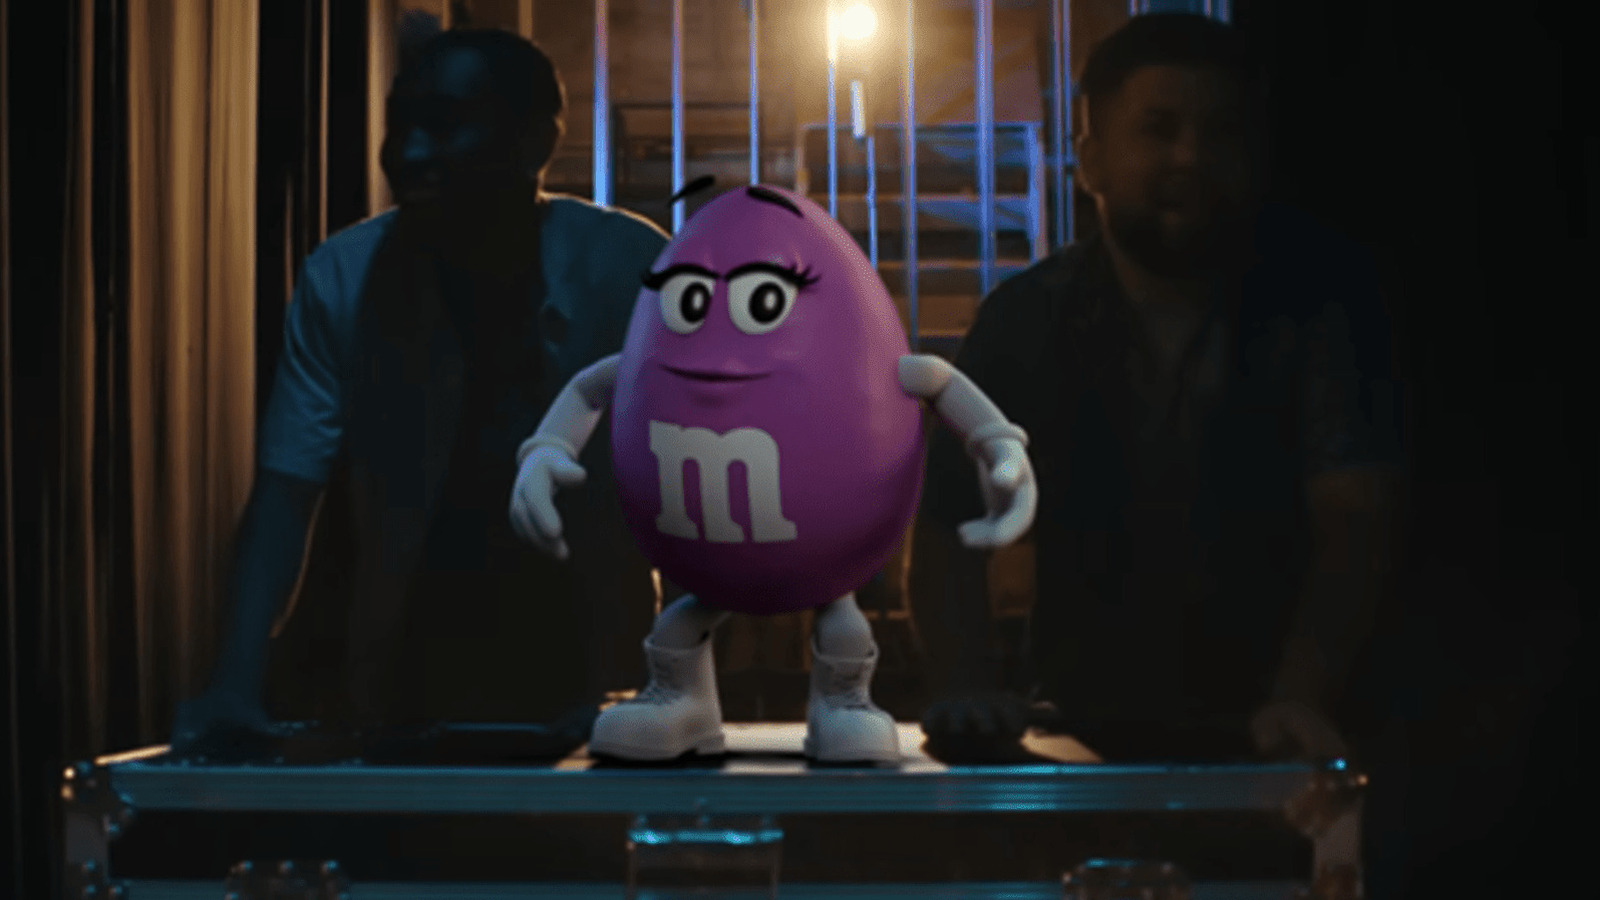 The Purple M&M Is Already Getting Shipped With A FastFood Mascot